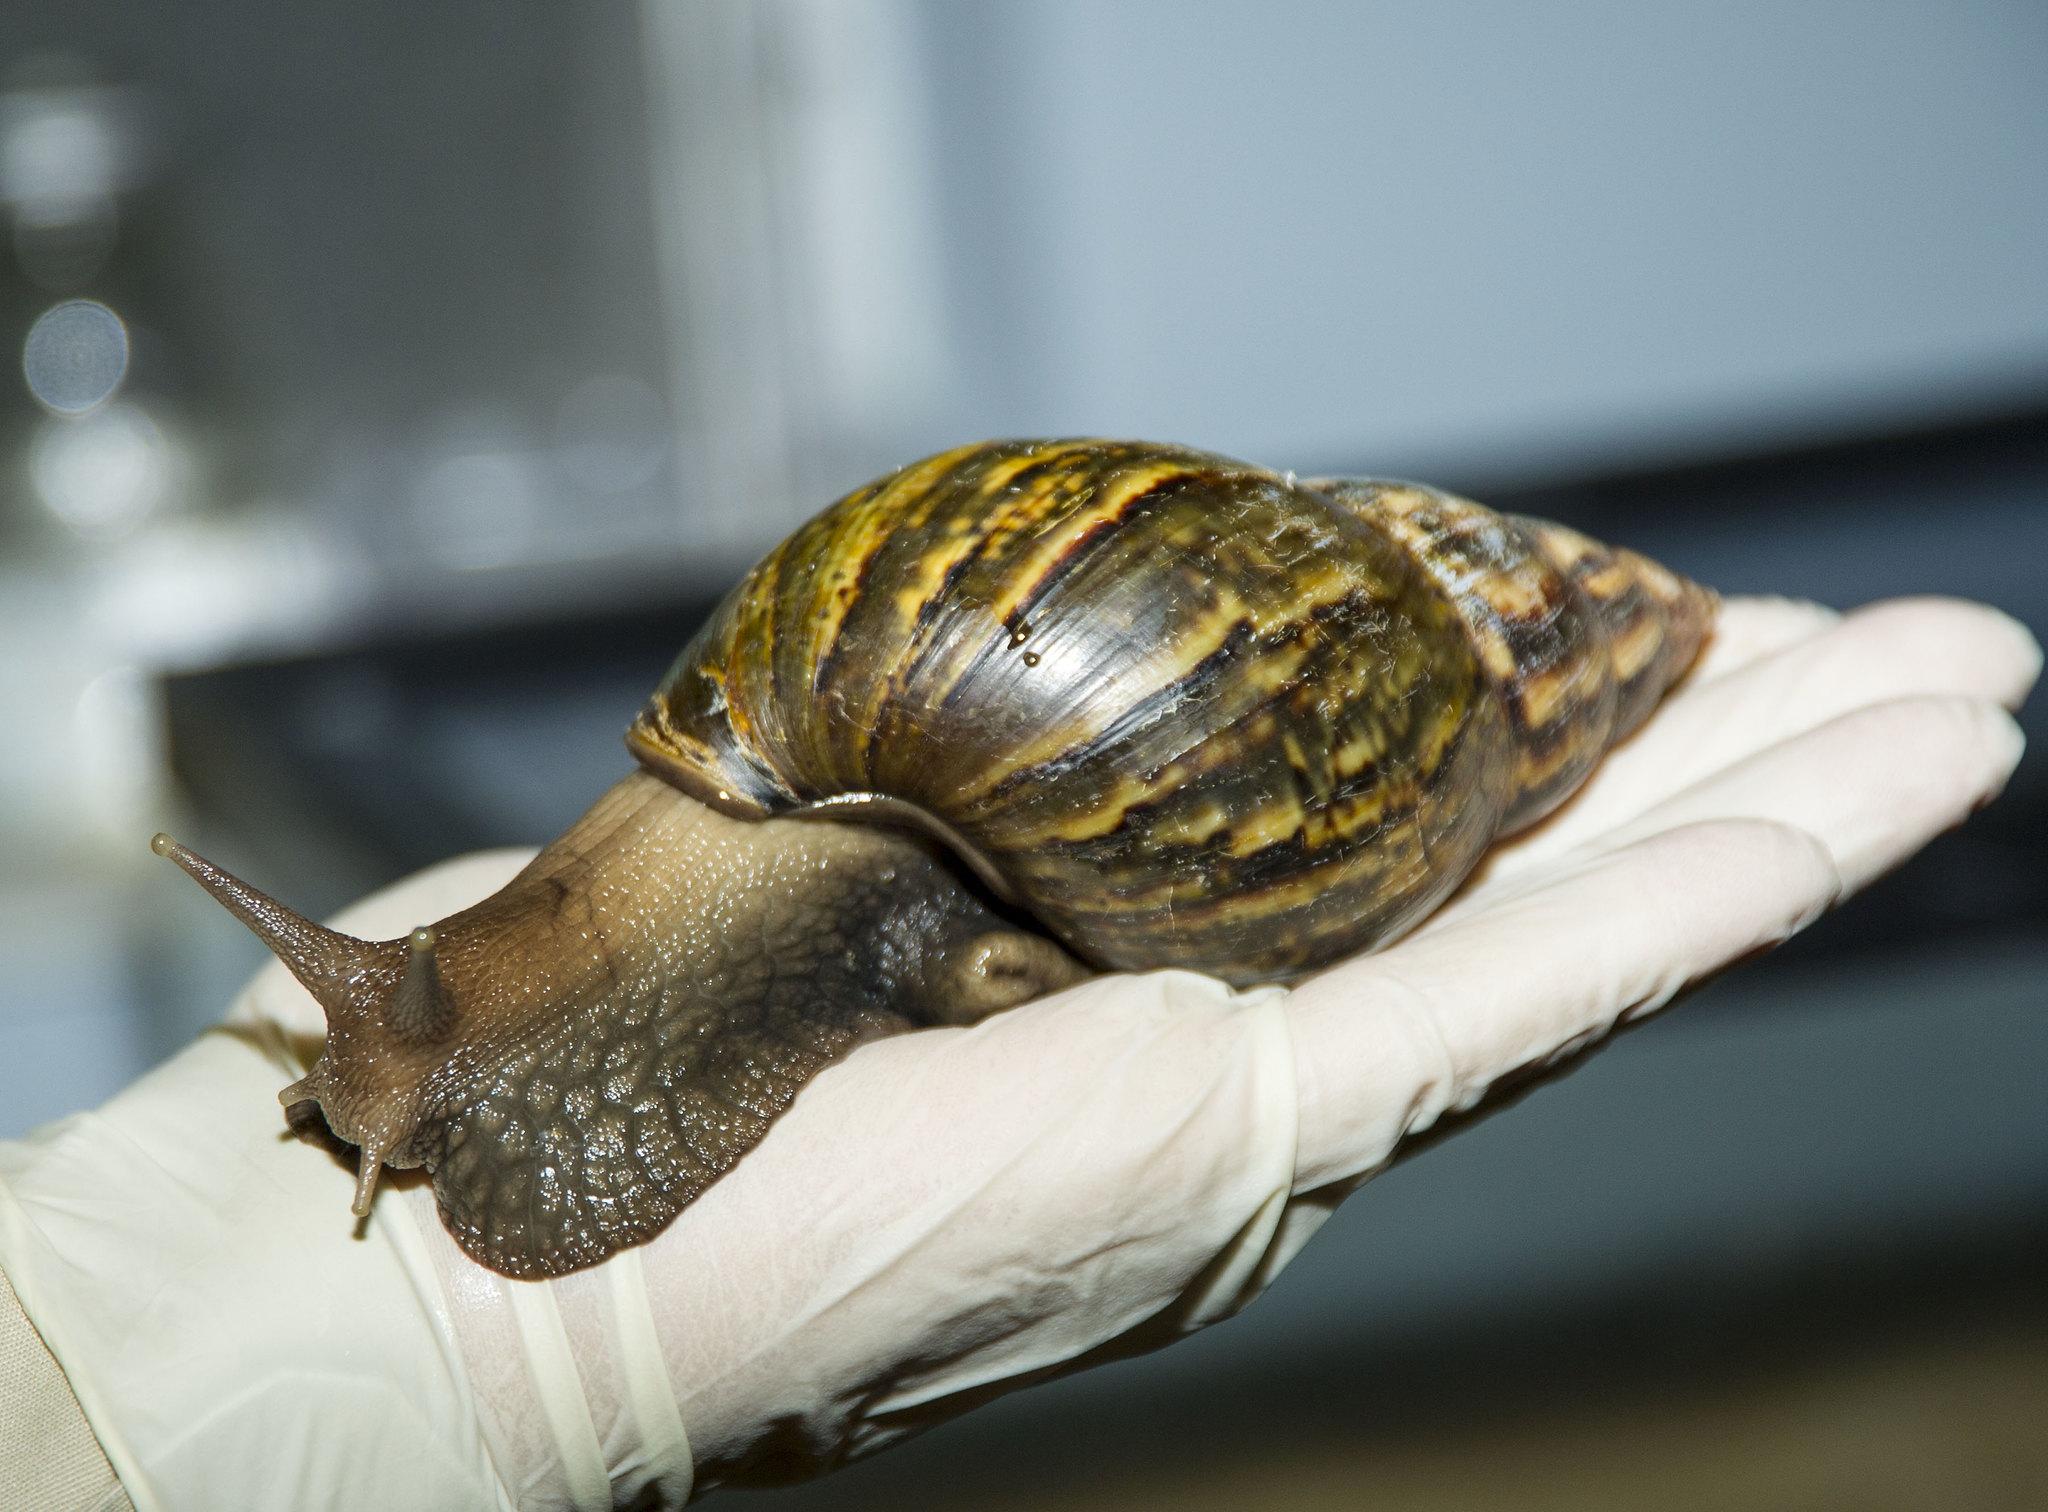 Giant African land snail. (USDA Animal and Plant Health Inspection Service)